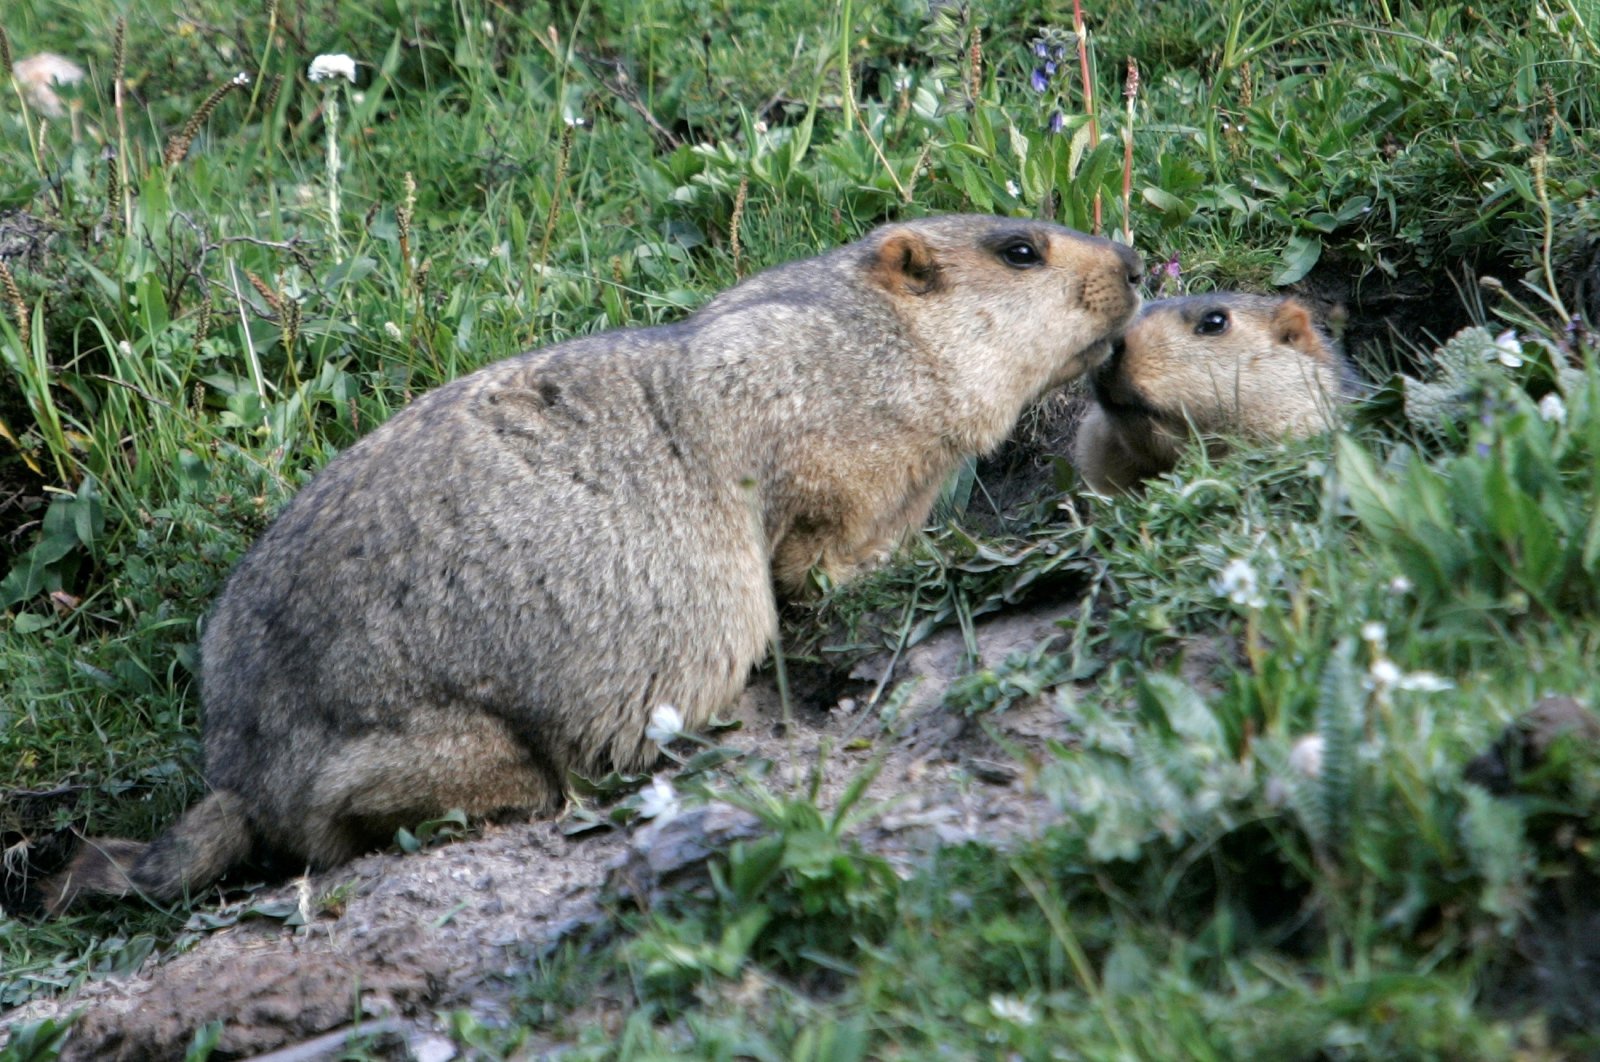 Two marmots meet at the entrance of their lair in Yushu, west China's Qinghai province on July 28, 2007. (Reuters Photo)